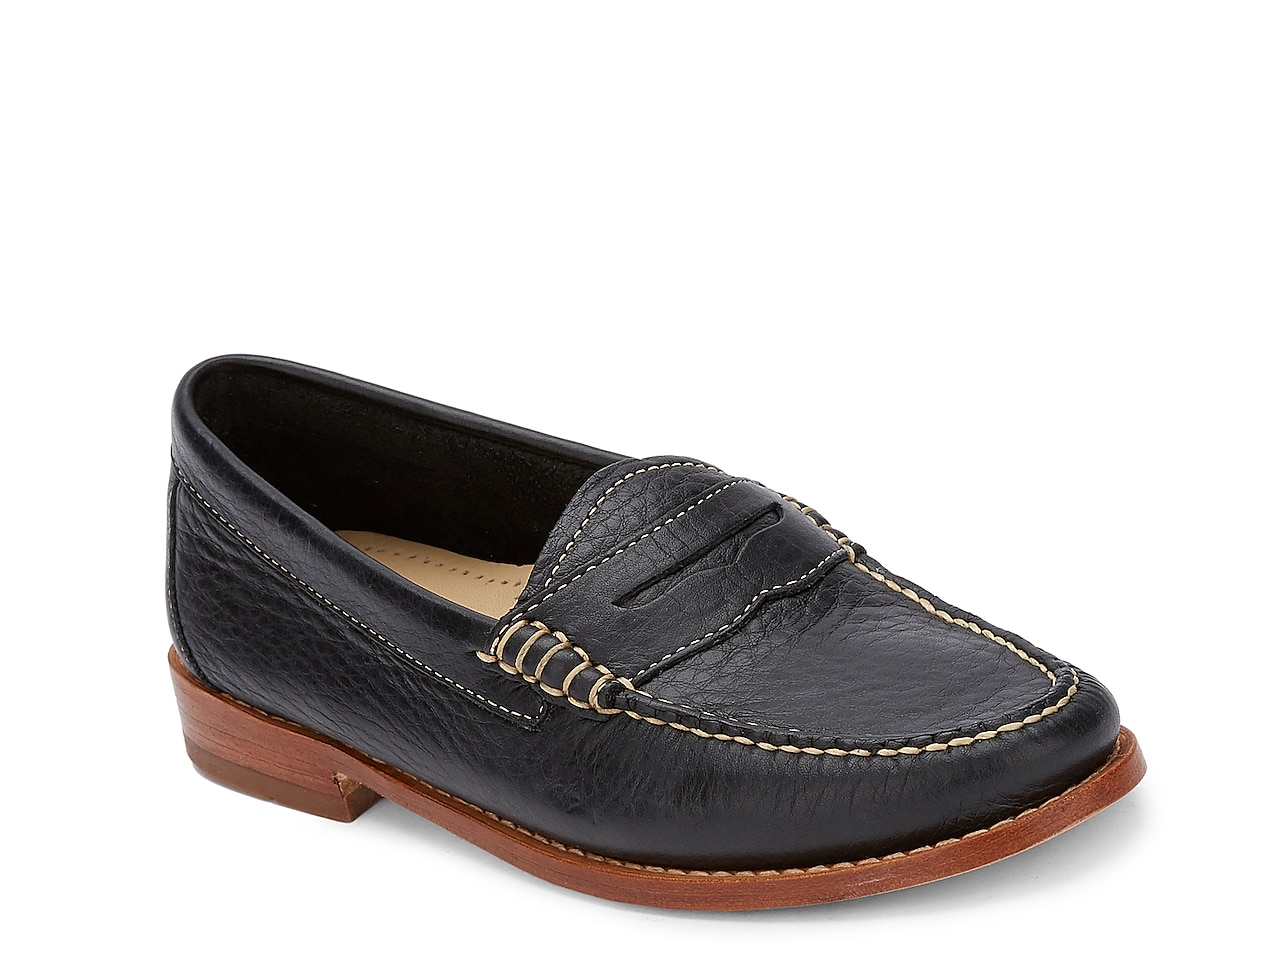 G.H. Bass & Co. Whitney Weejuns Leather Penny Loafer Women's Shoes | DSW